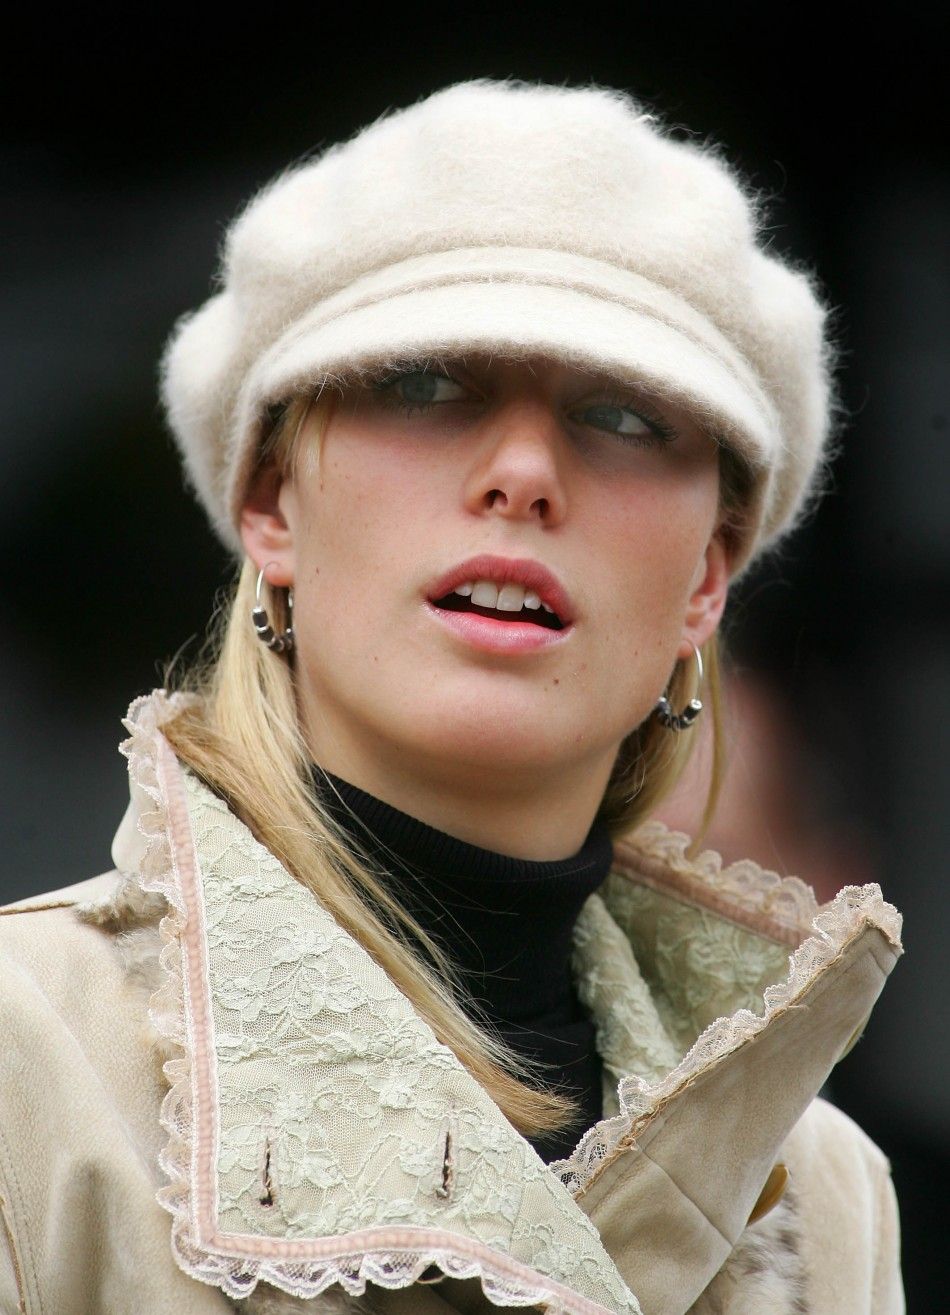 Britains Zara Phillips, granddaughter of Queen Elizabeth, arrives on the second day of the Cheltenham National Hunt Festival meeting in Gloucestershire, central England